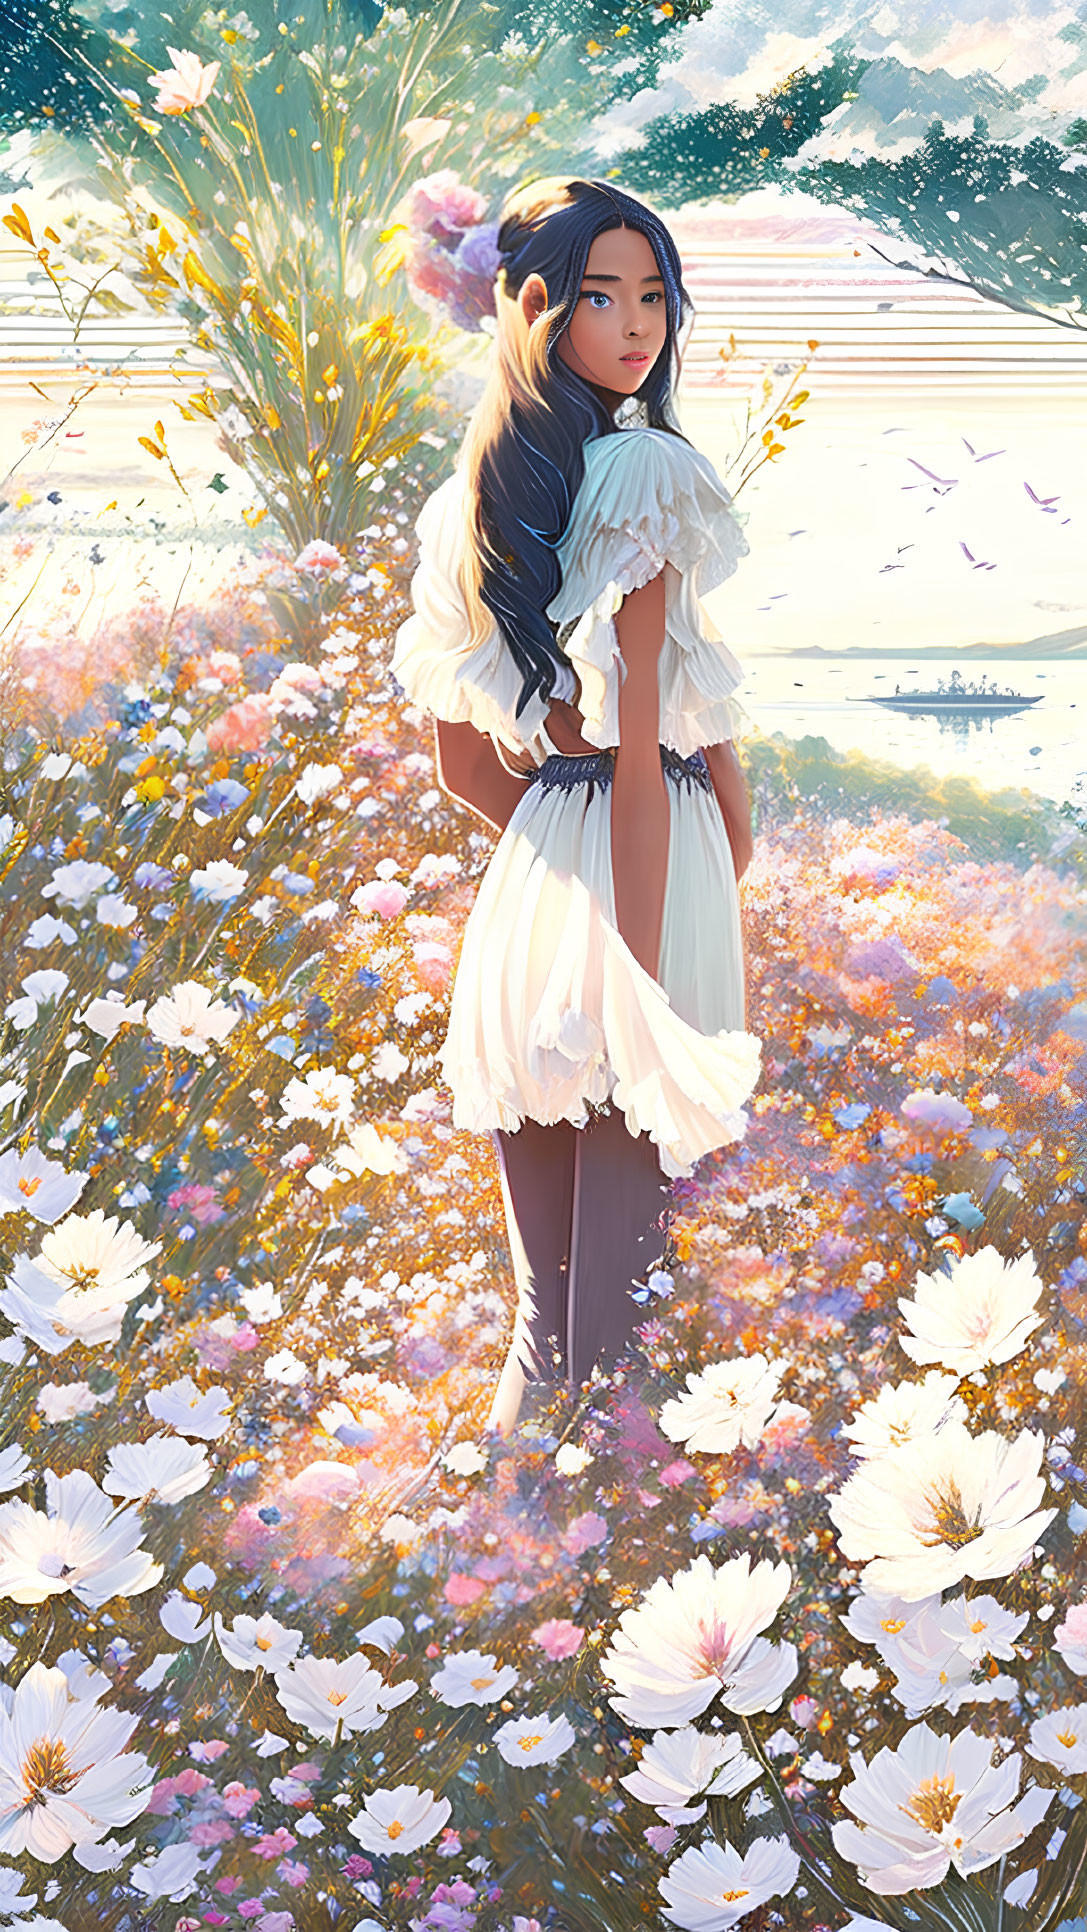 Woman in Field of White and Pink Flowers with Sunlight, Birds, and Mountains